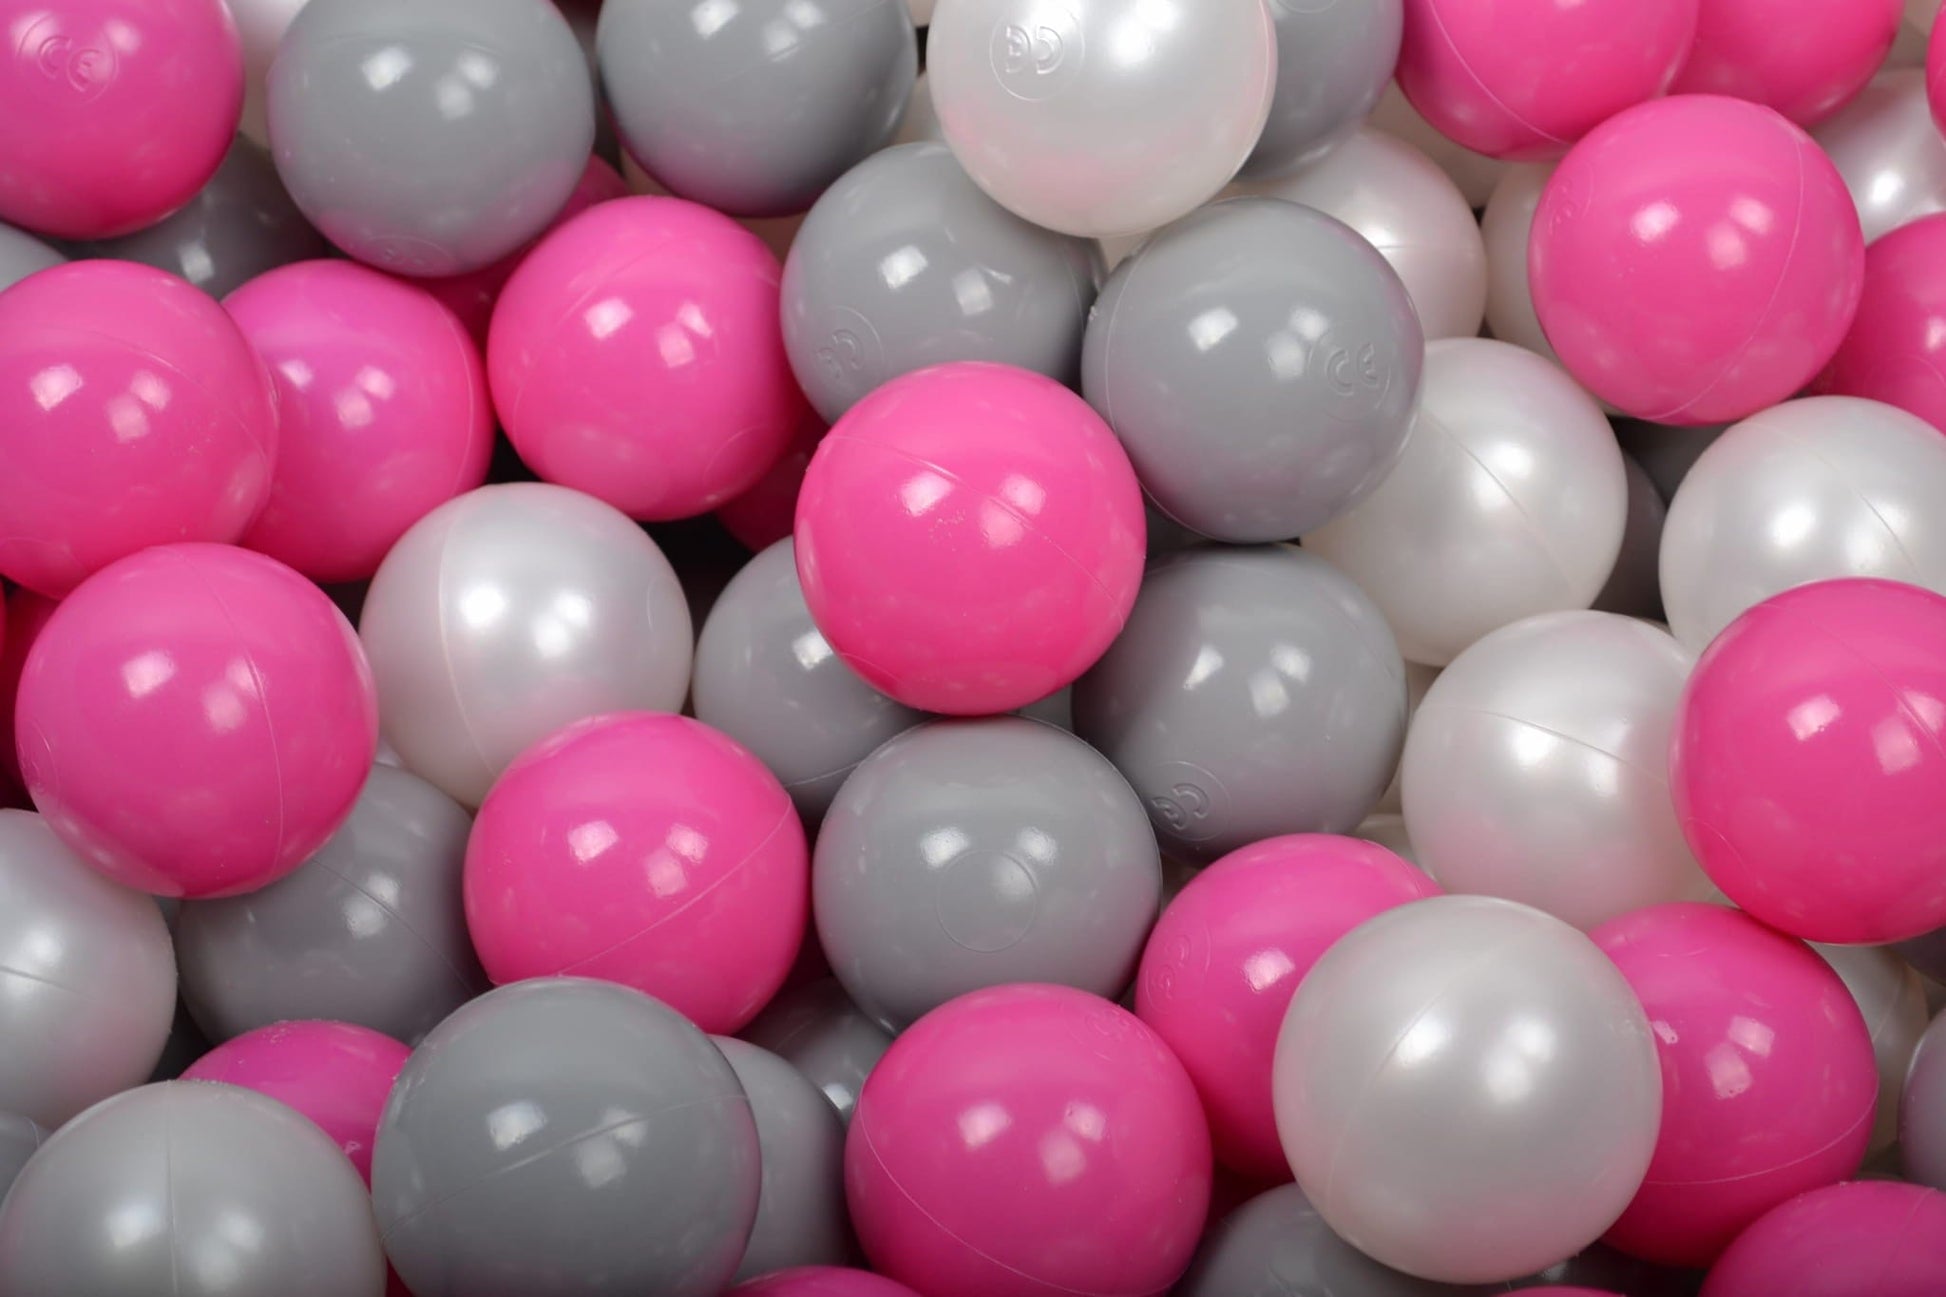 Luxury Cotton Round Ball Pit - Bold 'n Bubbly For Kids By MeowBaby - Stylemykid.com